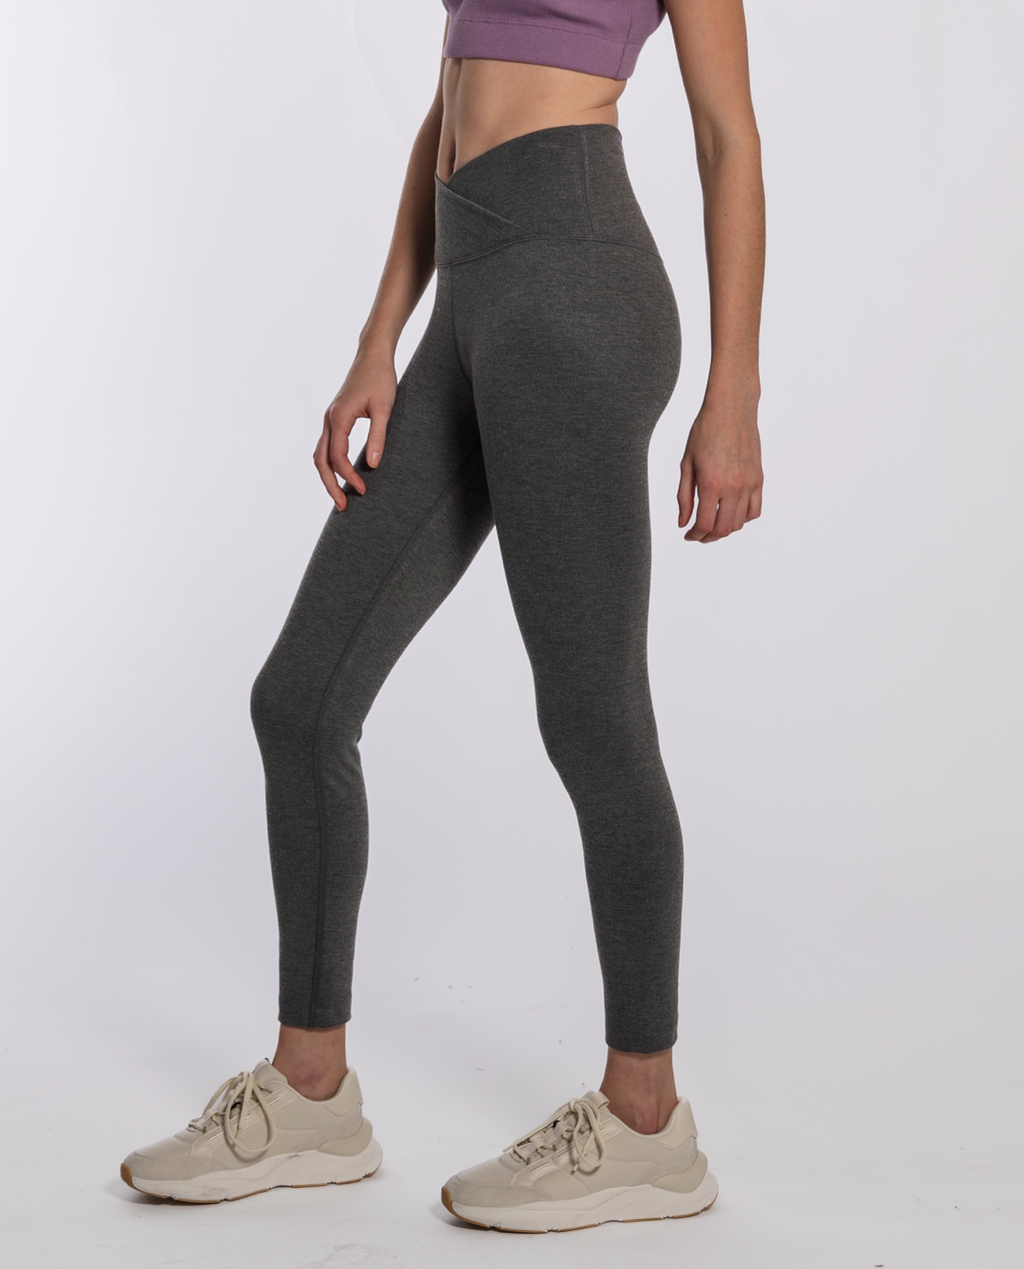 Women's Leggings and Tights - Price (High - Low) – Reebok Canada